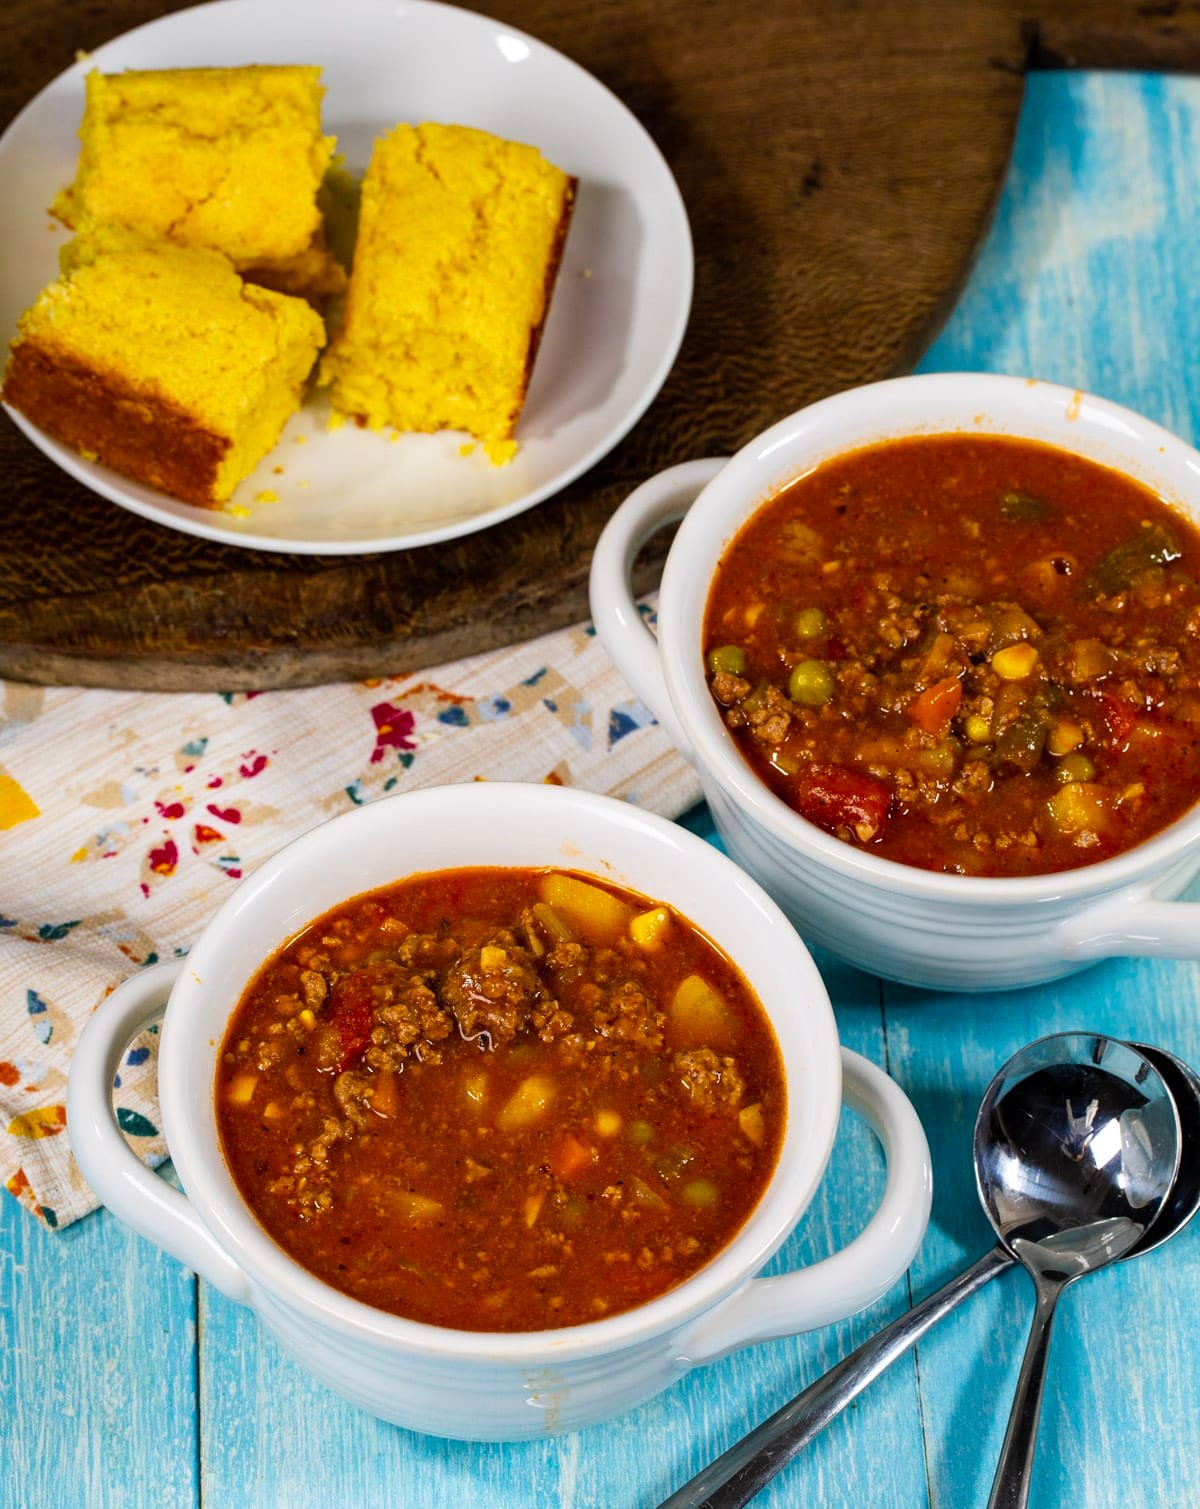 Stew in two bowls and plate or cornbread.